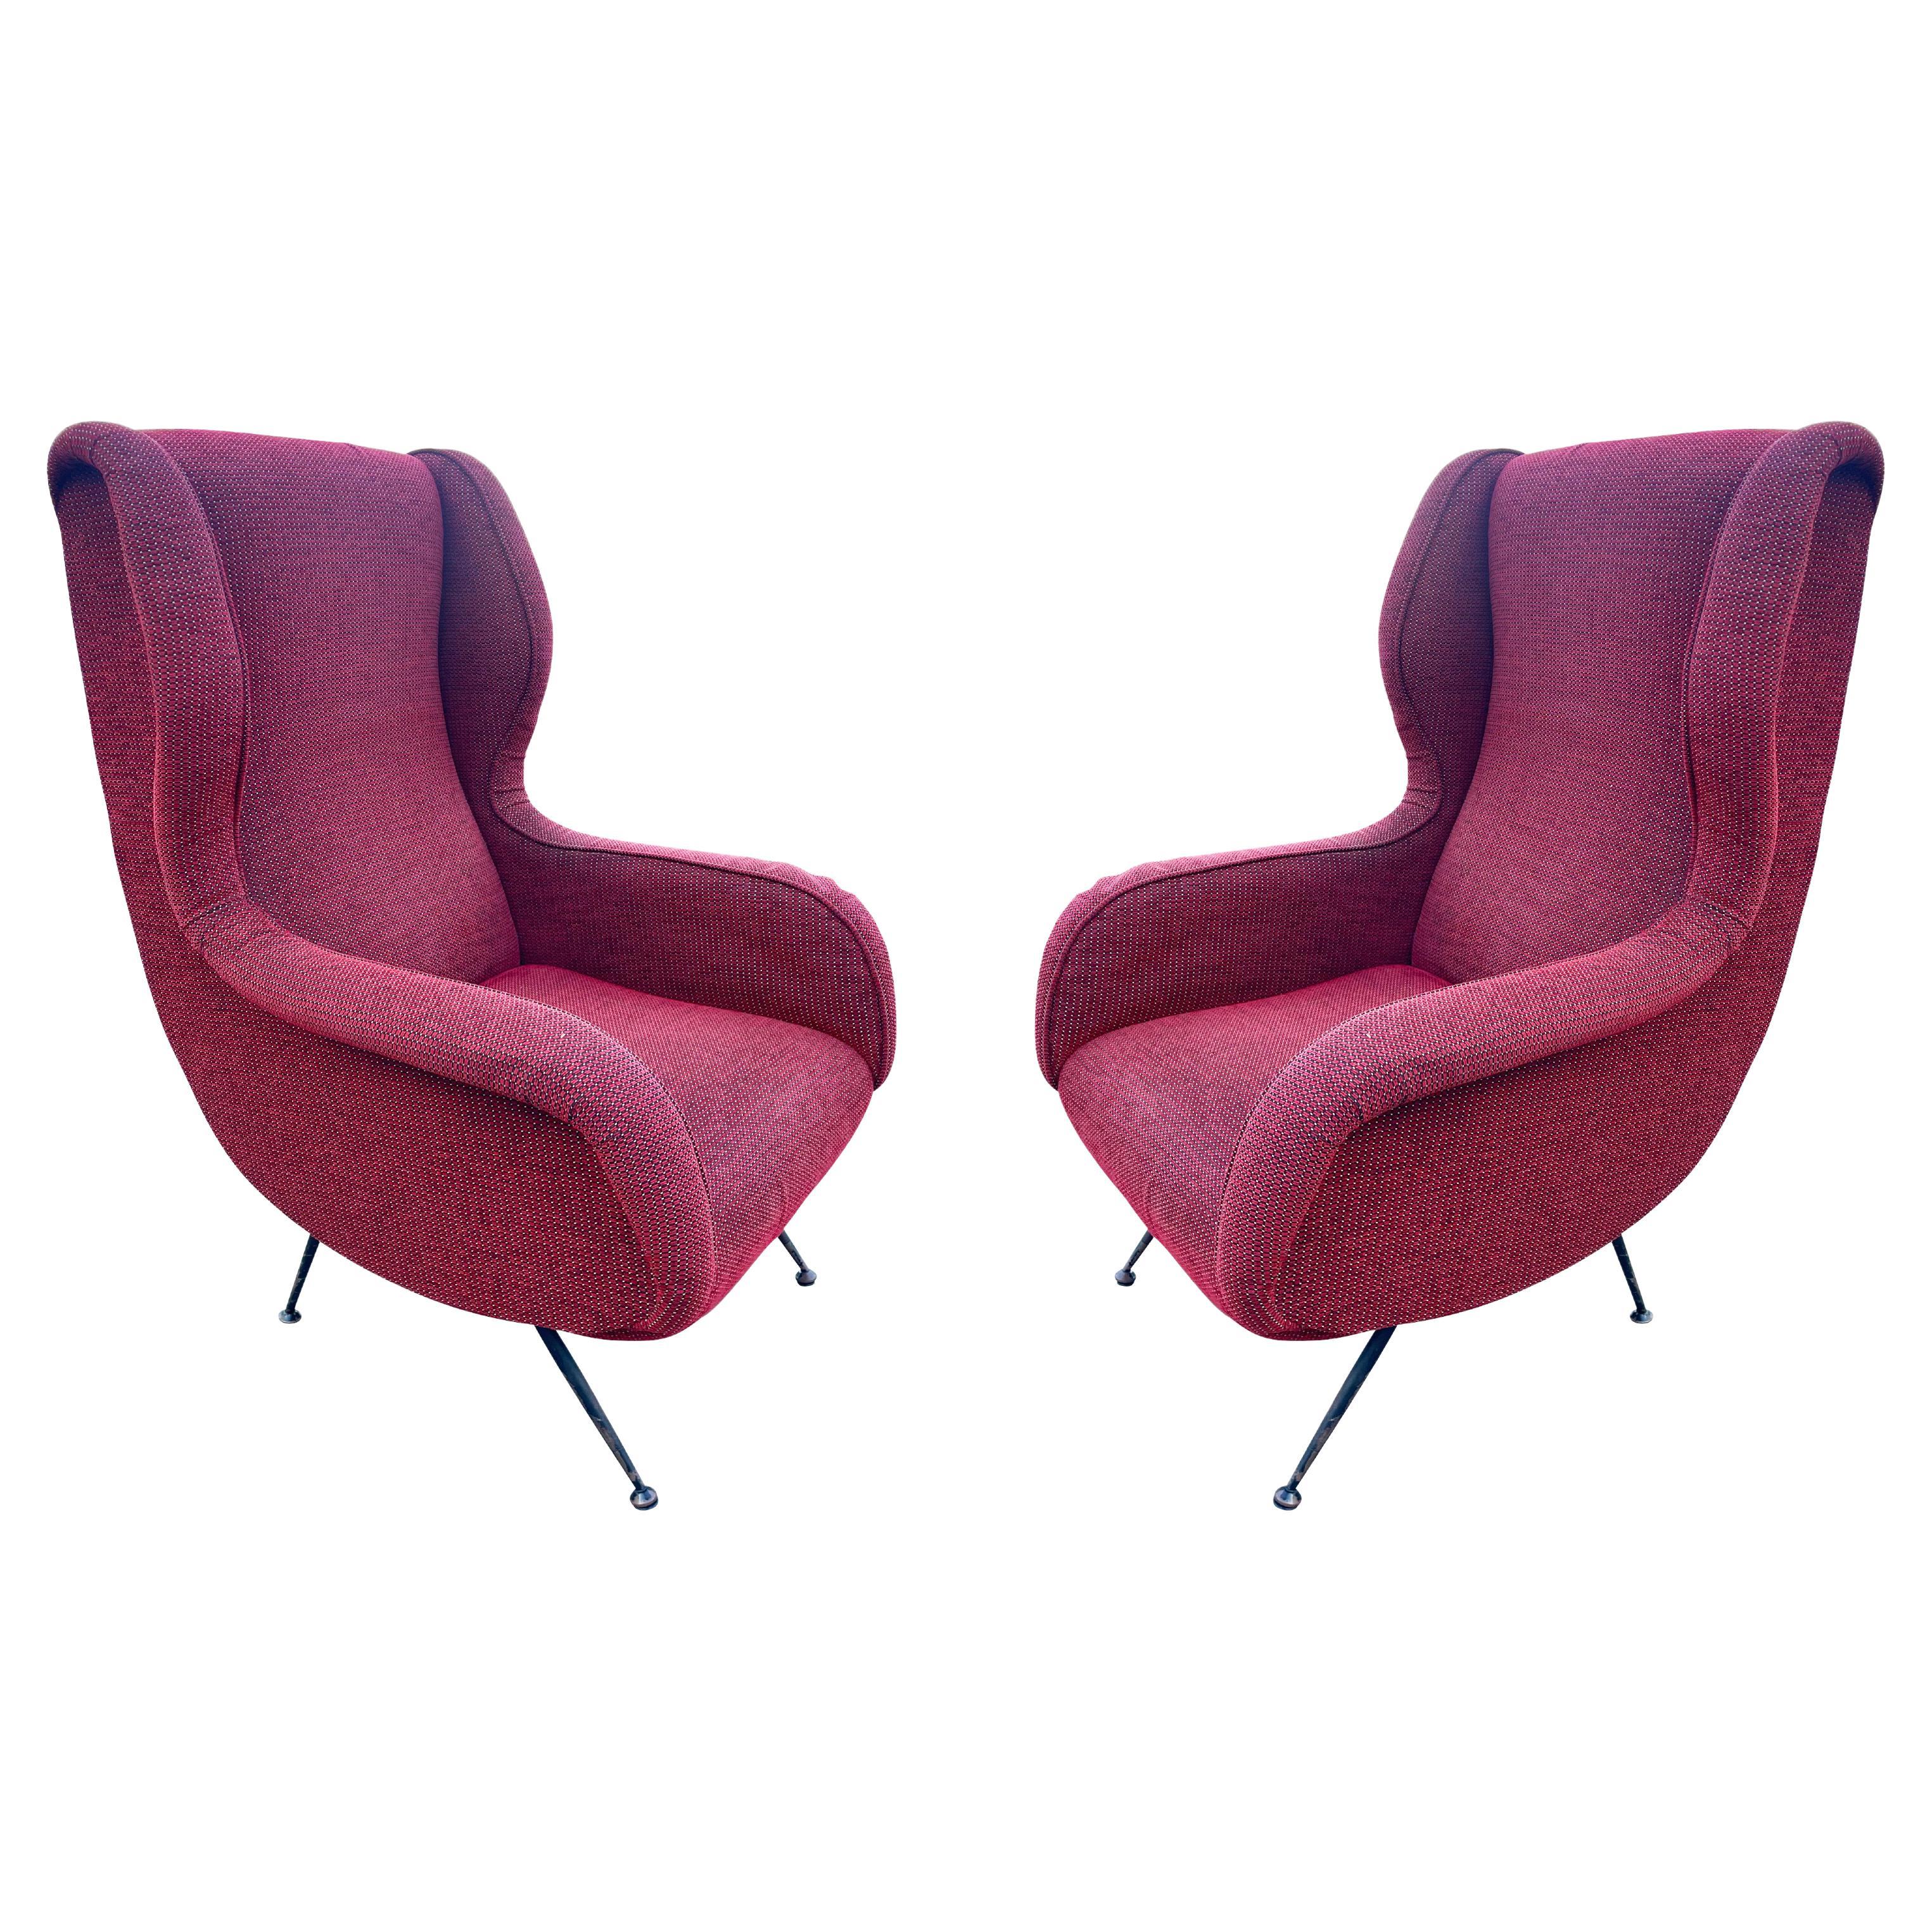 Pair of Marco Zanuso Style Lounge Chairs, Italy, 1960s